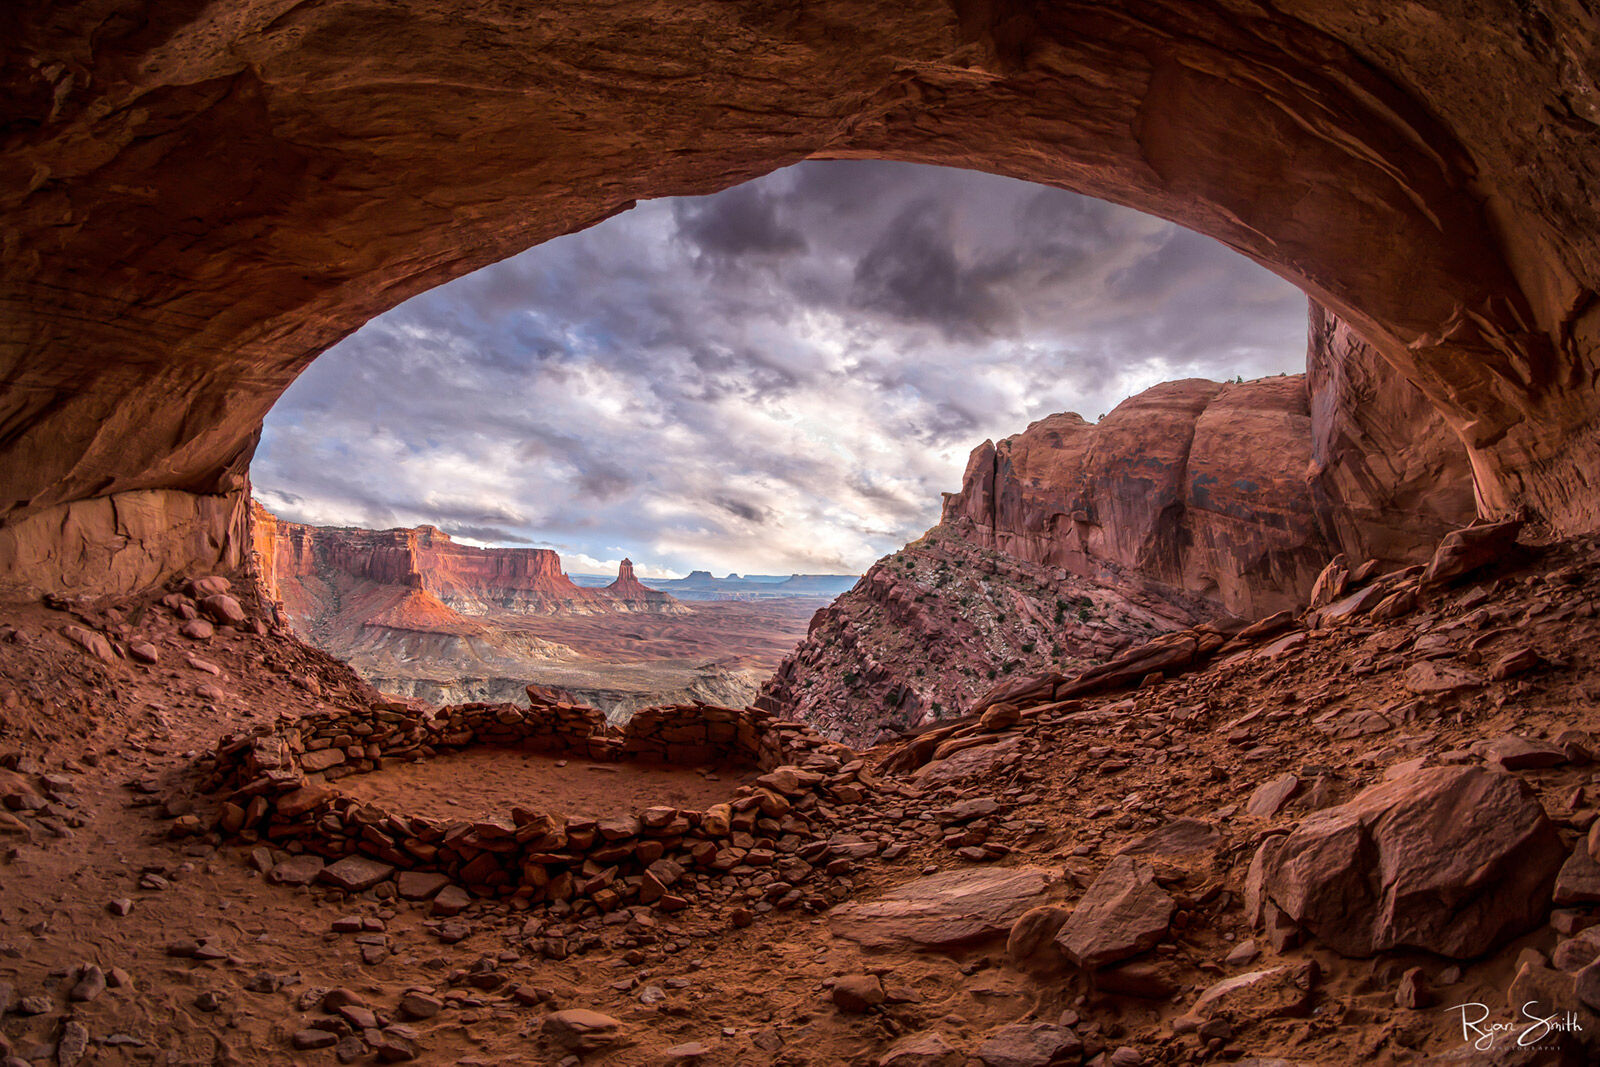 A circle of stones used for ancient religious purposes sits in a cave like kiva with a sky full of white clouds and a blue sky.